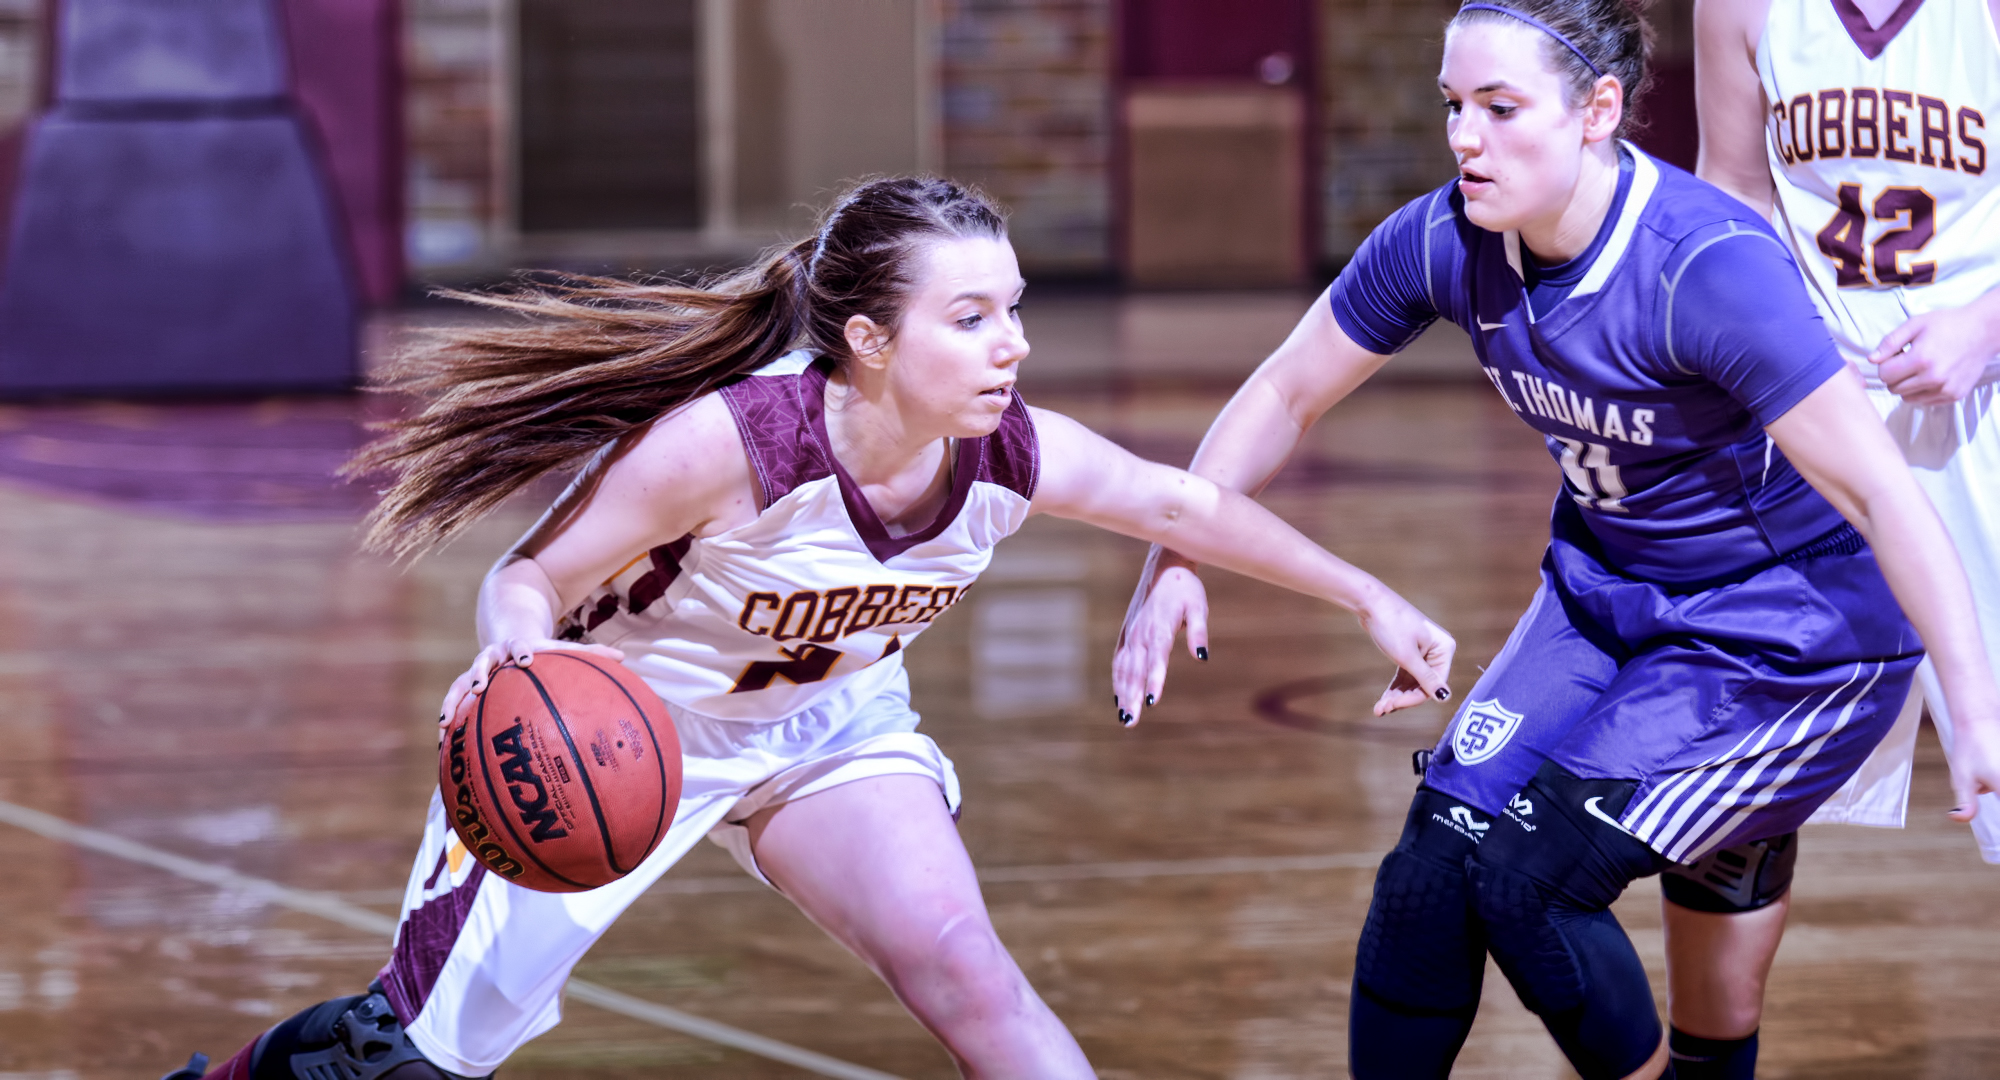 Senior Cassidy Rahman drives around a St. Thomas defender during the Cobbers' game with the nationally ranked Tommies. Rahman finished with five points and two assists. (Photo courtesy of Sam Sabin)